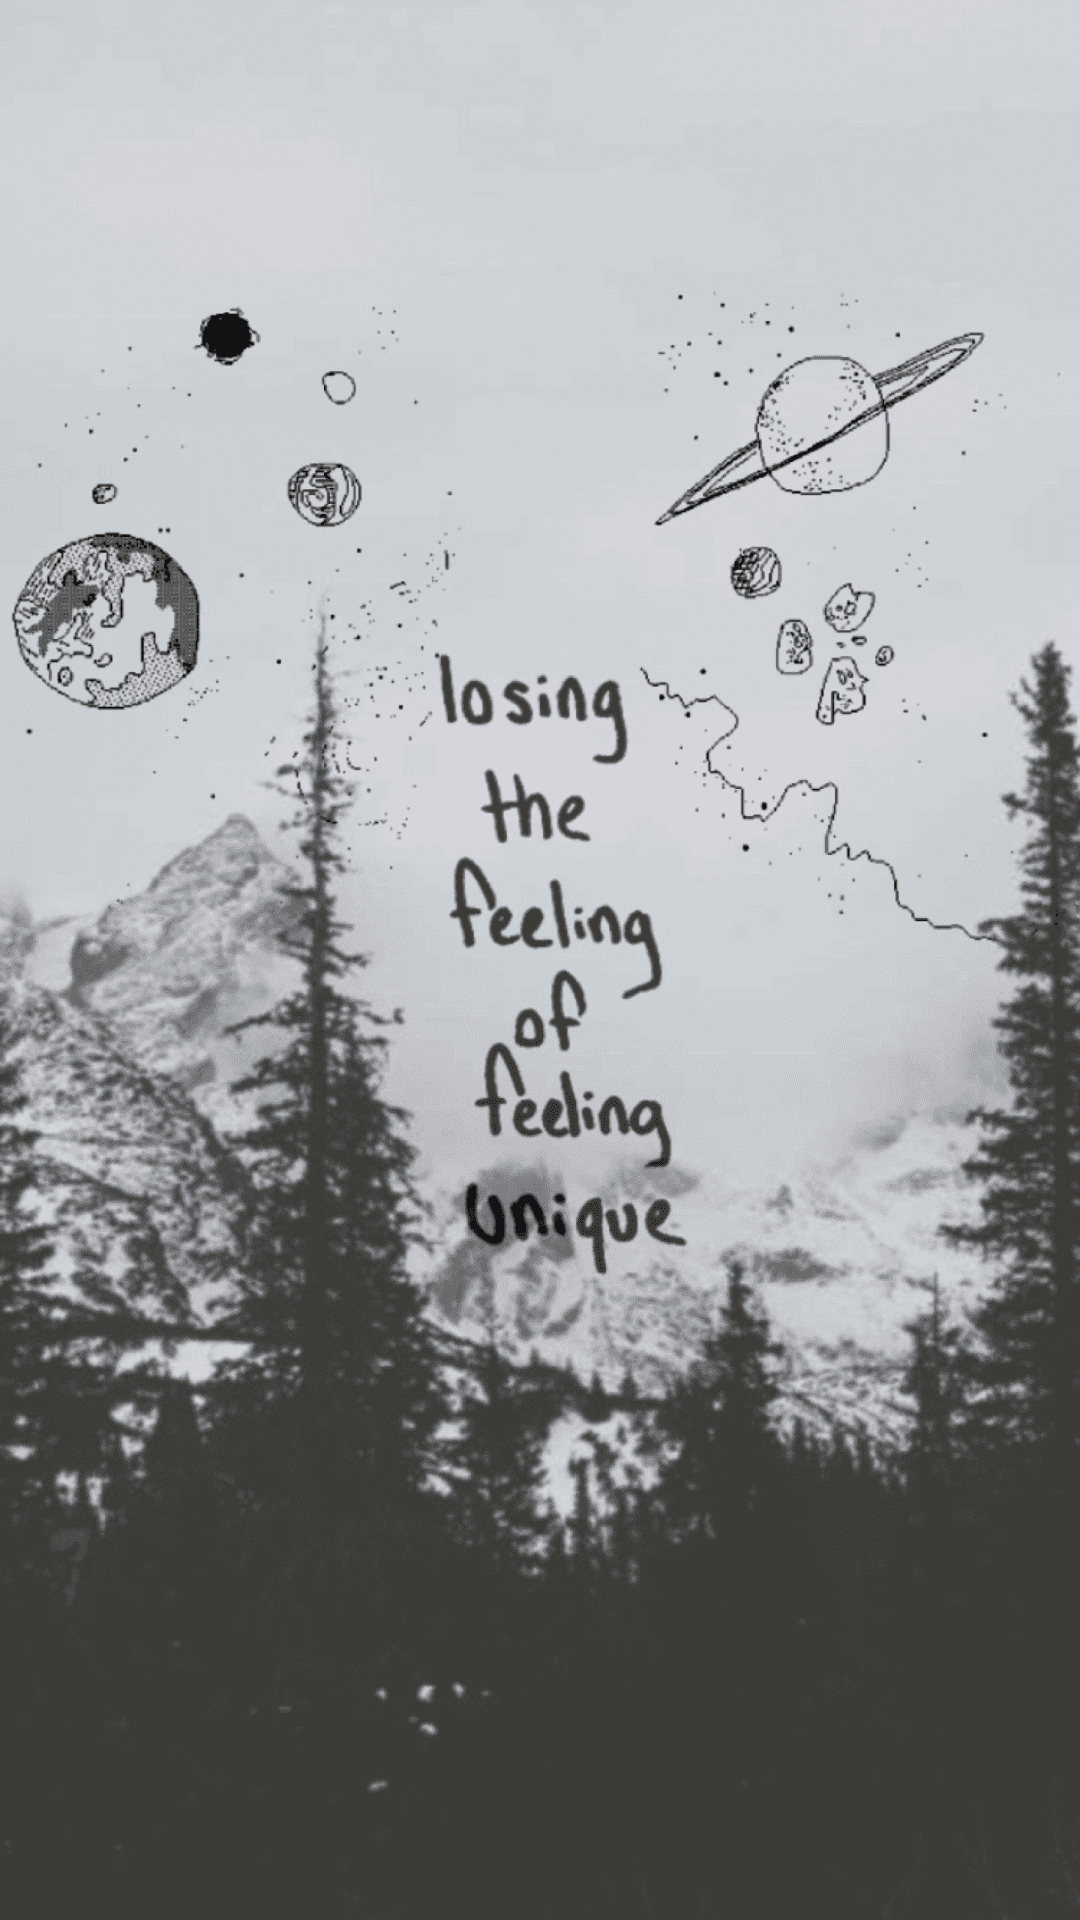 A Black And White Drawing Of A Spaceship With The Words Losing The Feeling Of Flying